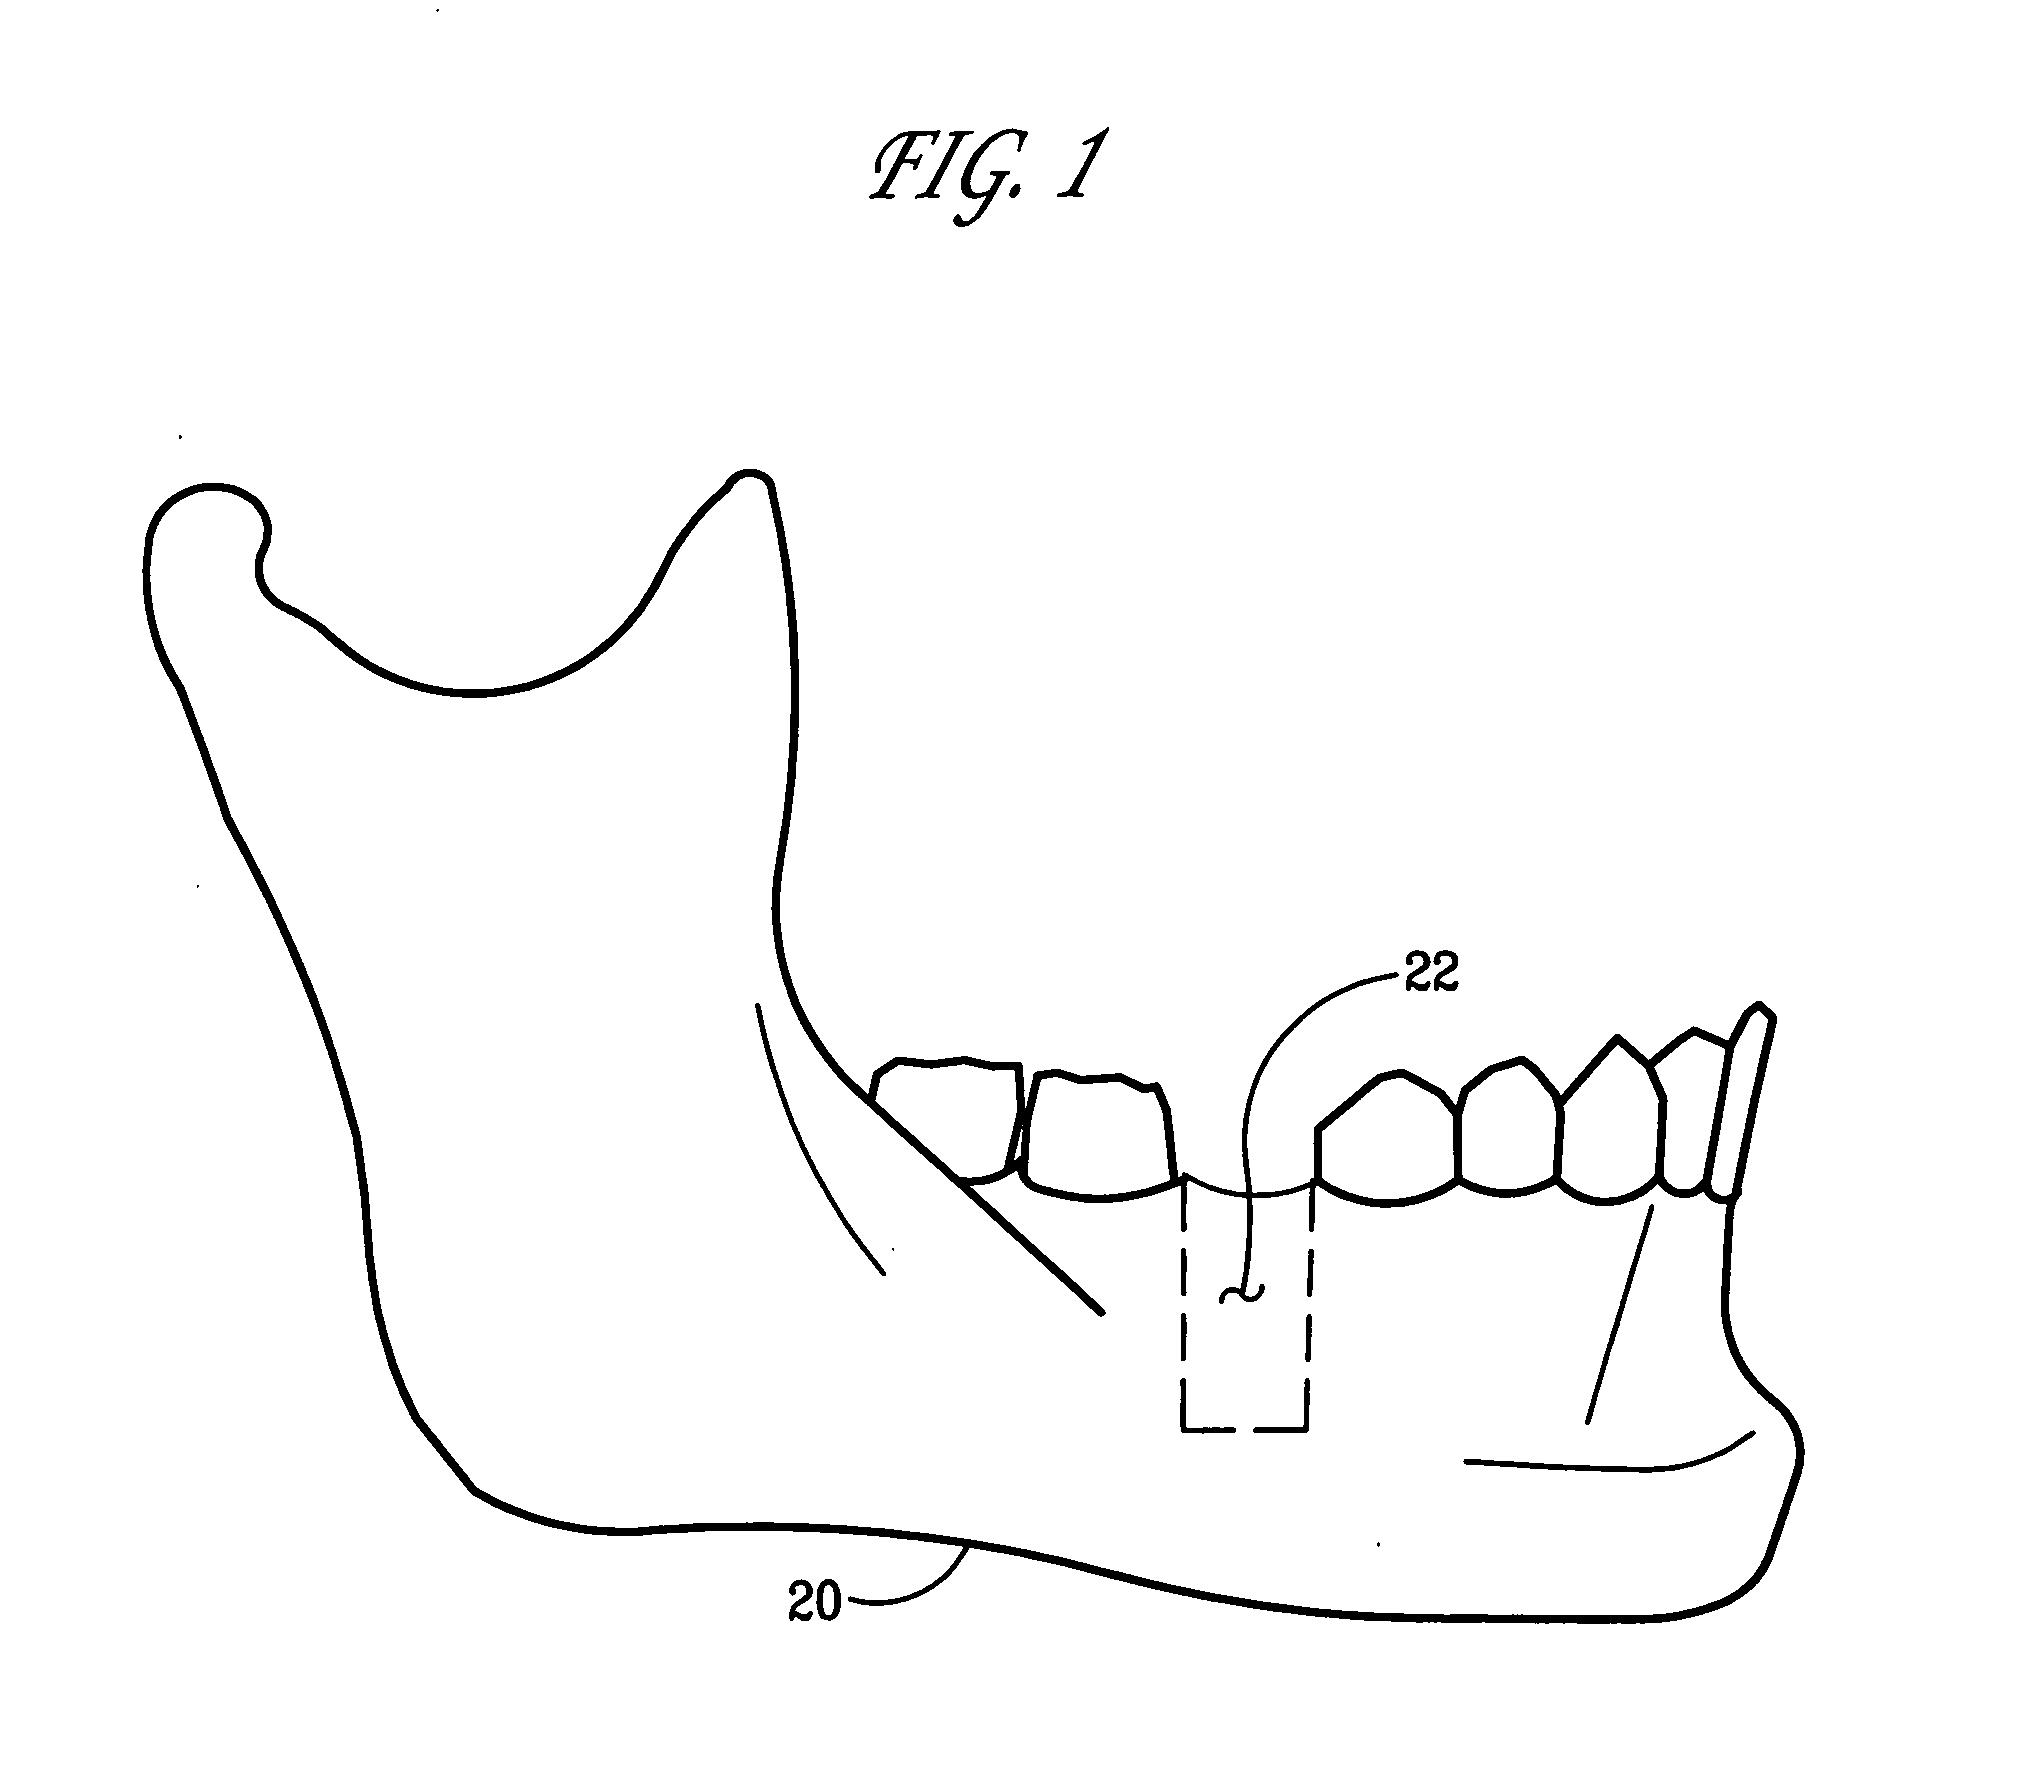 Apparatus and method for using an intraosseous space for moving fluid into and out of the body